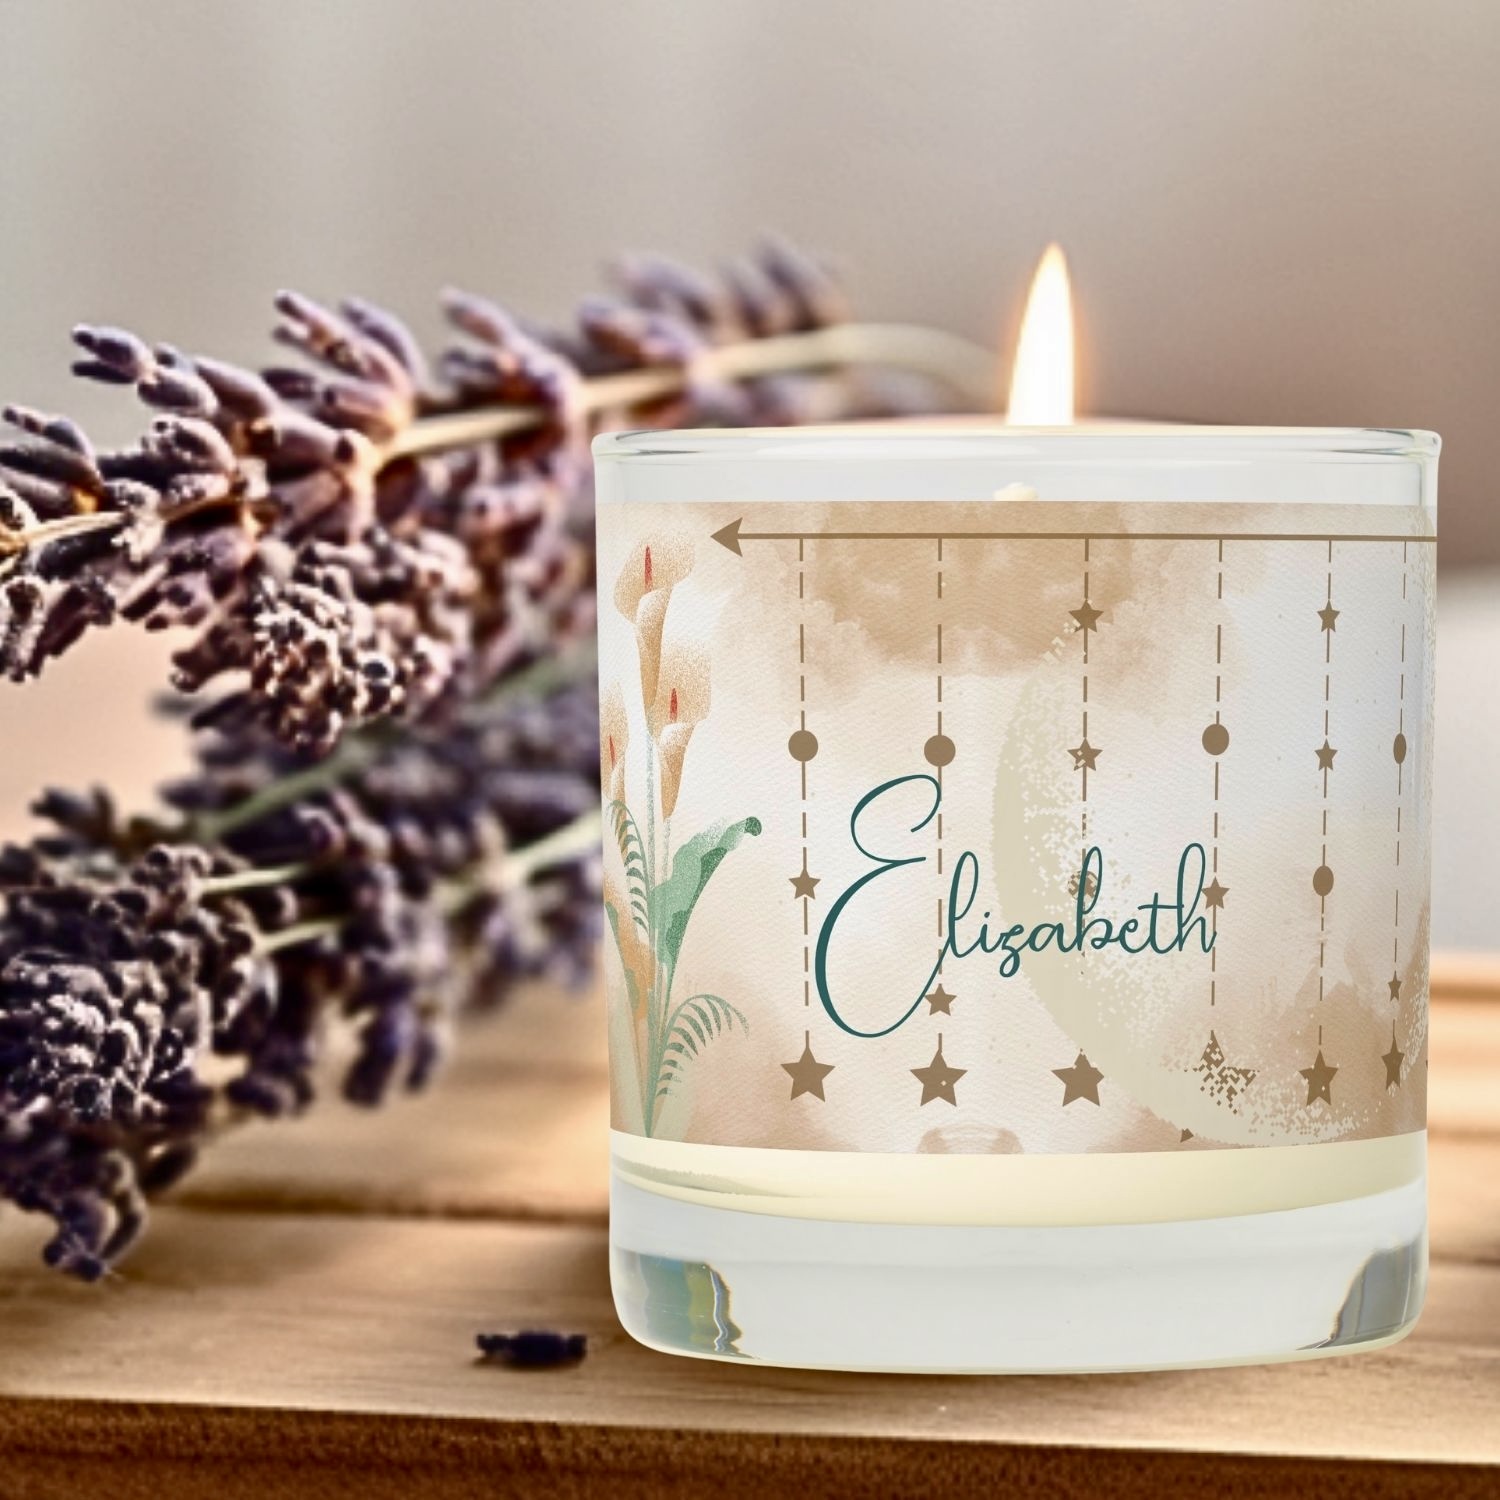 Close-up view of the Earthy Moonlit Flowers Decorative Boho Scented Candle, showcasing its intricate design and soothing aroma.